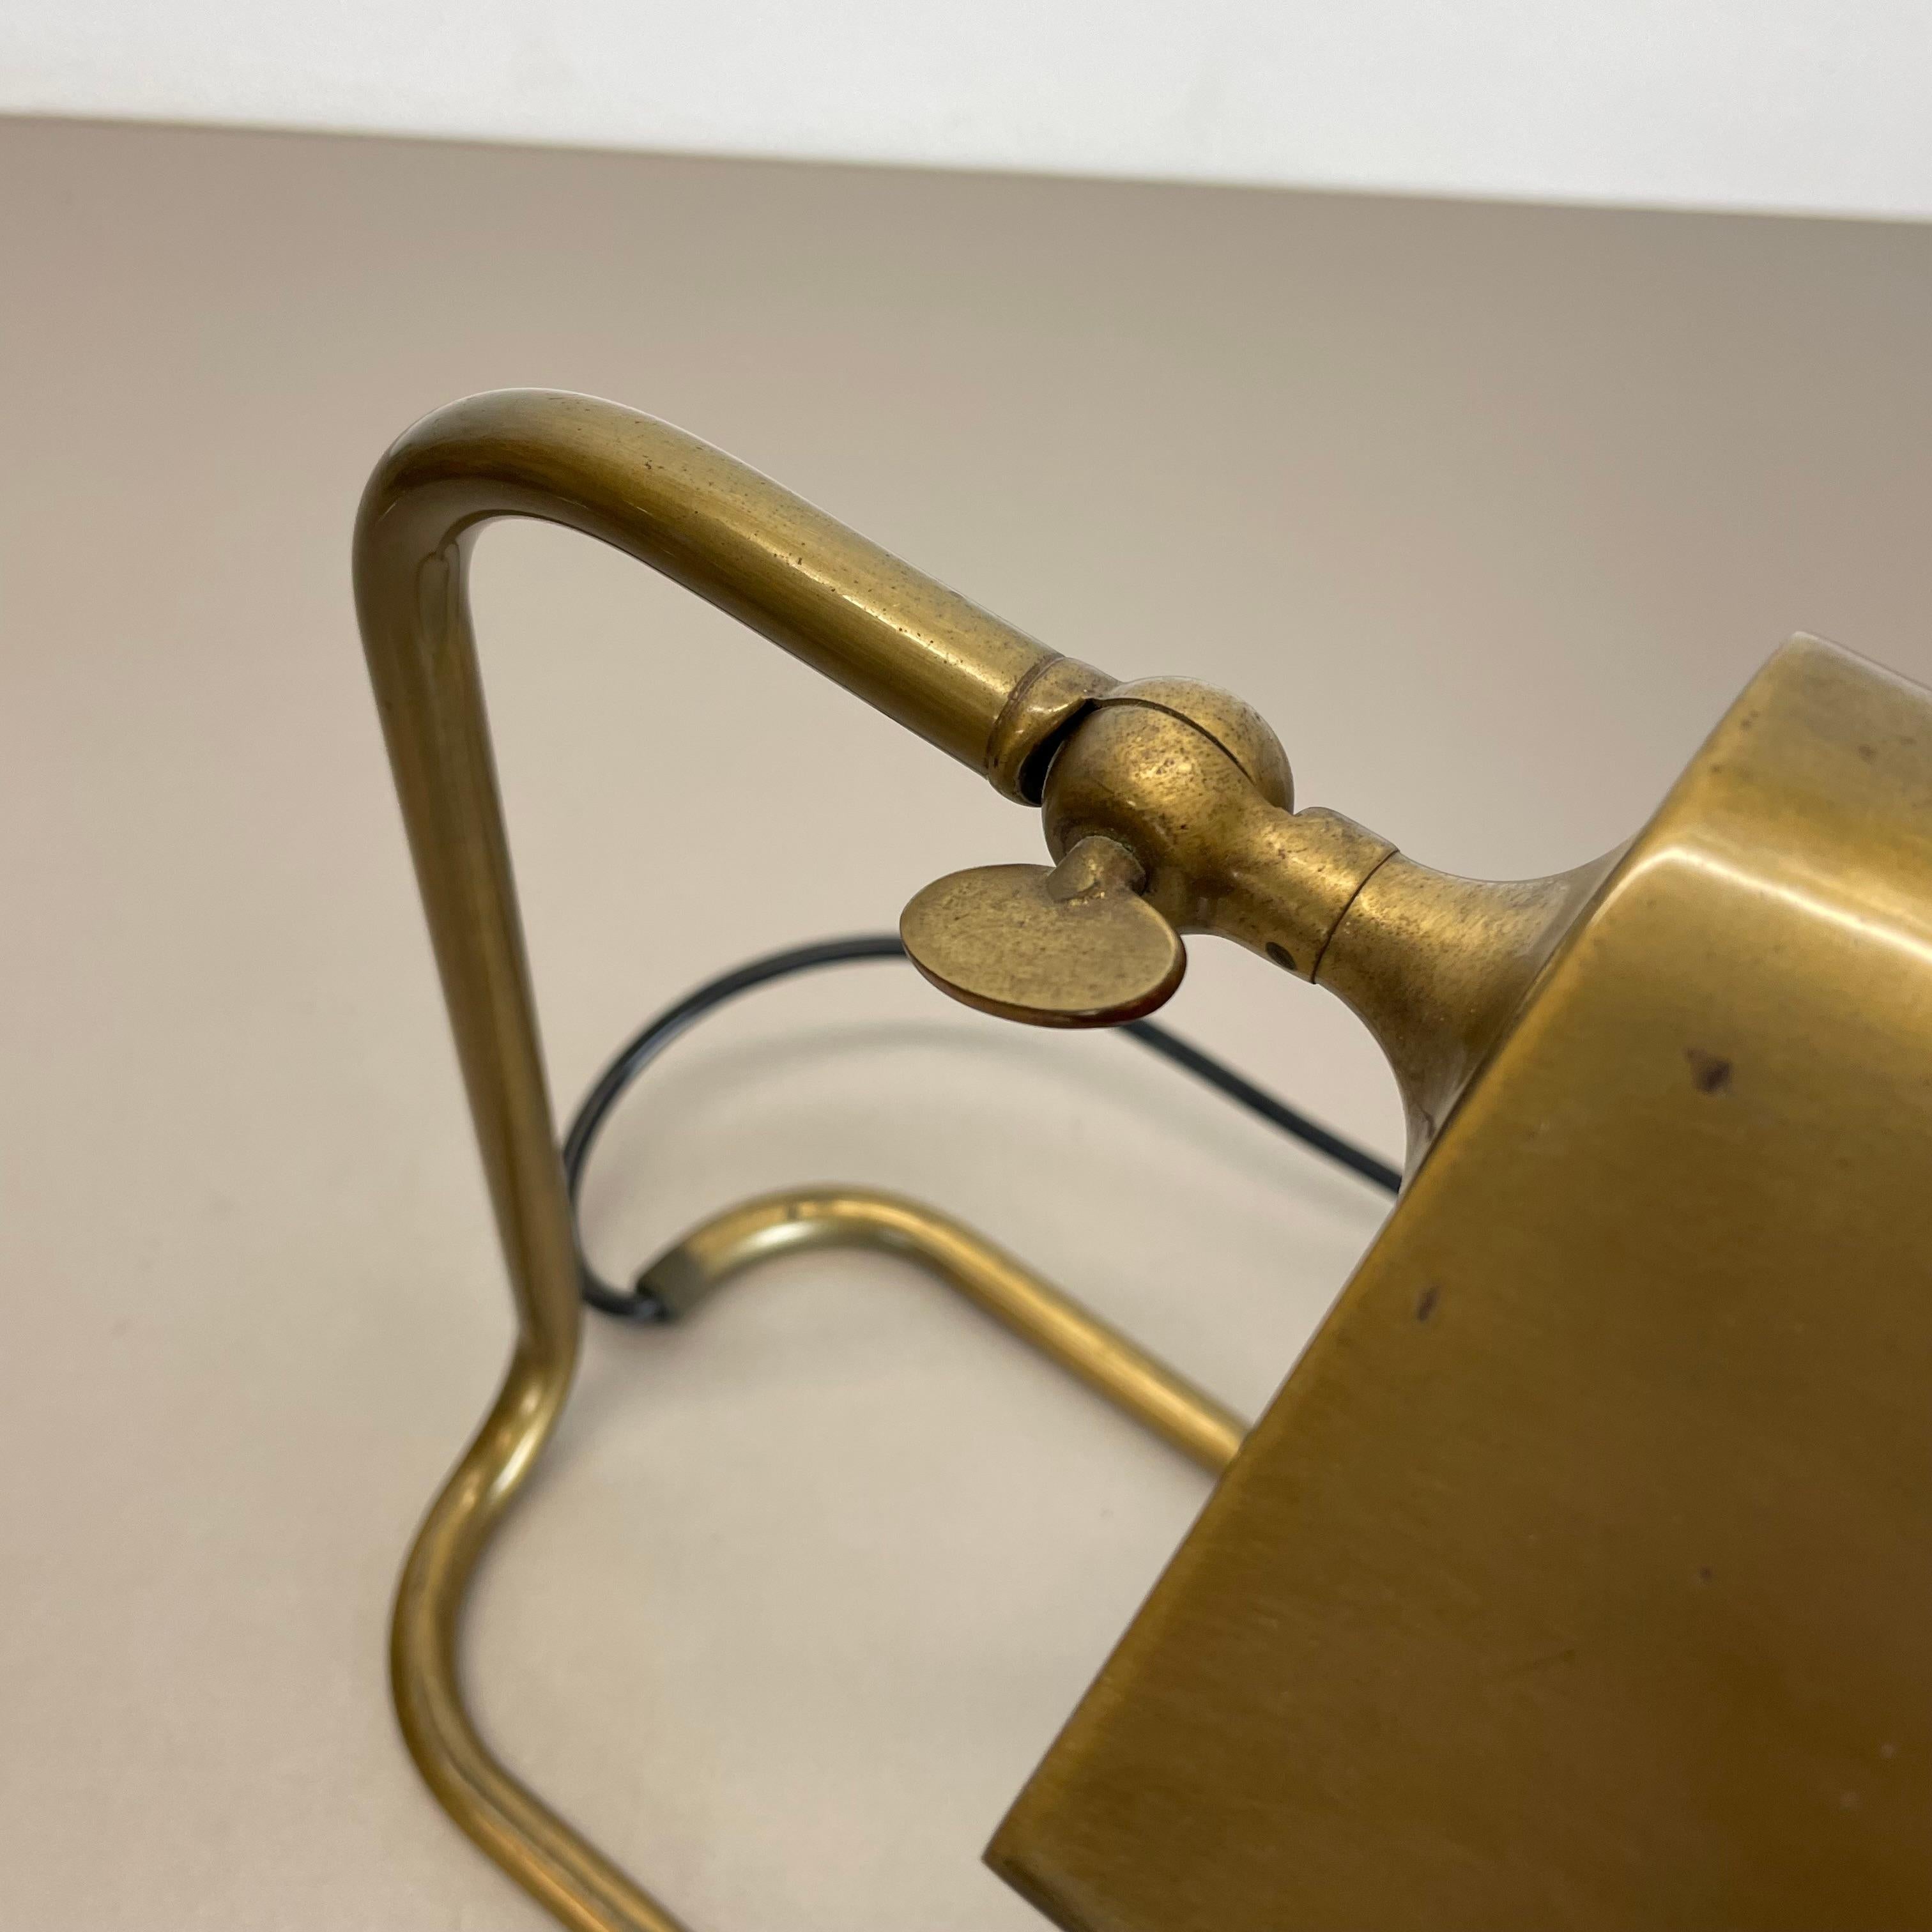 Cubic Modernist Brass Metal Table Light by Florian Schulz, Germany, 1970s For Sale 8